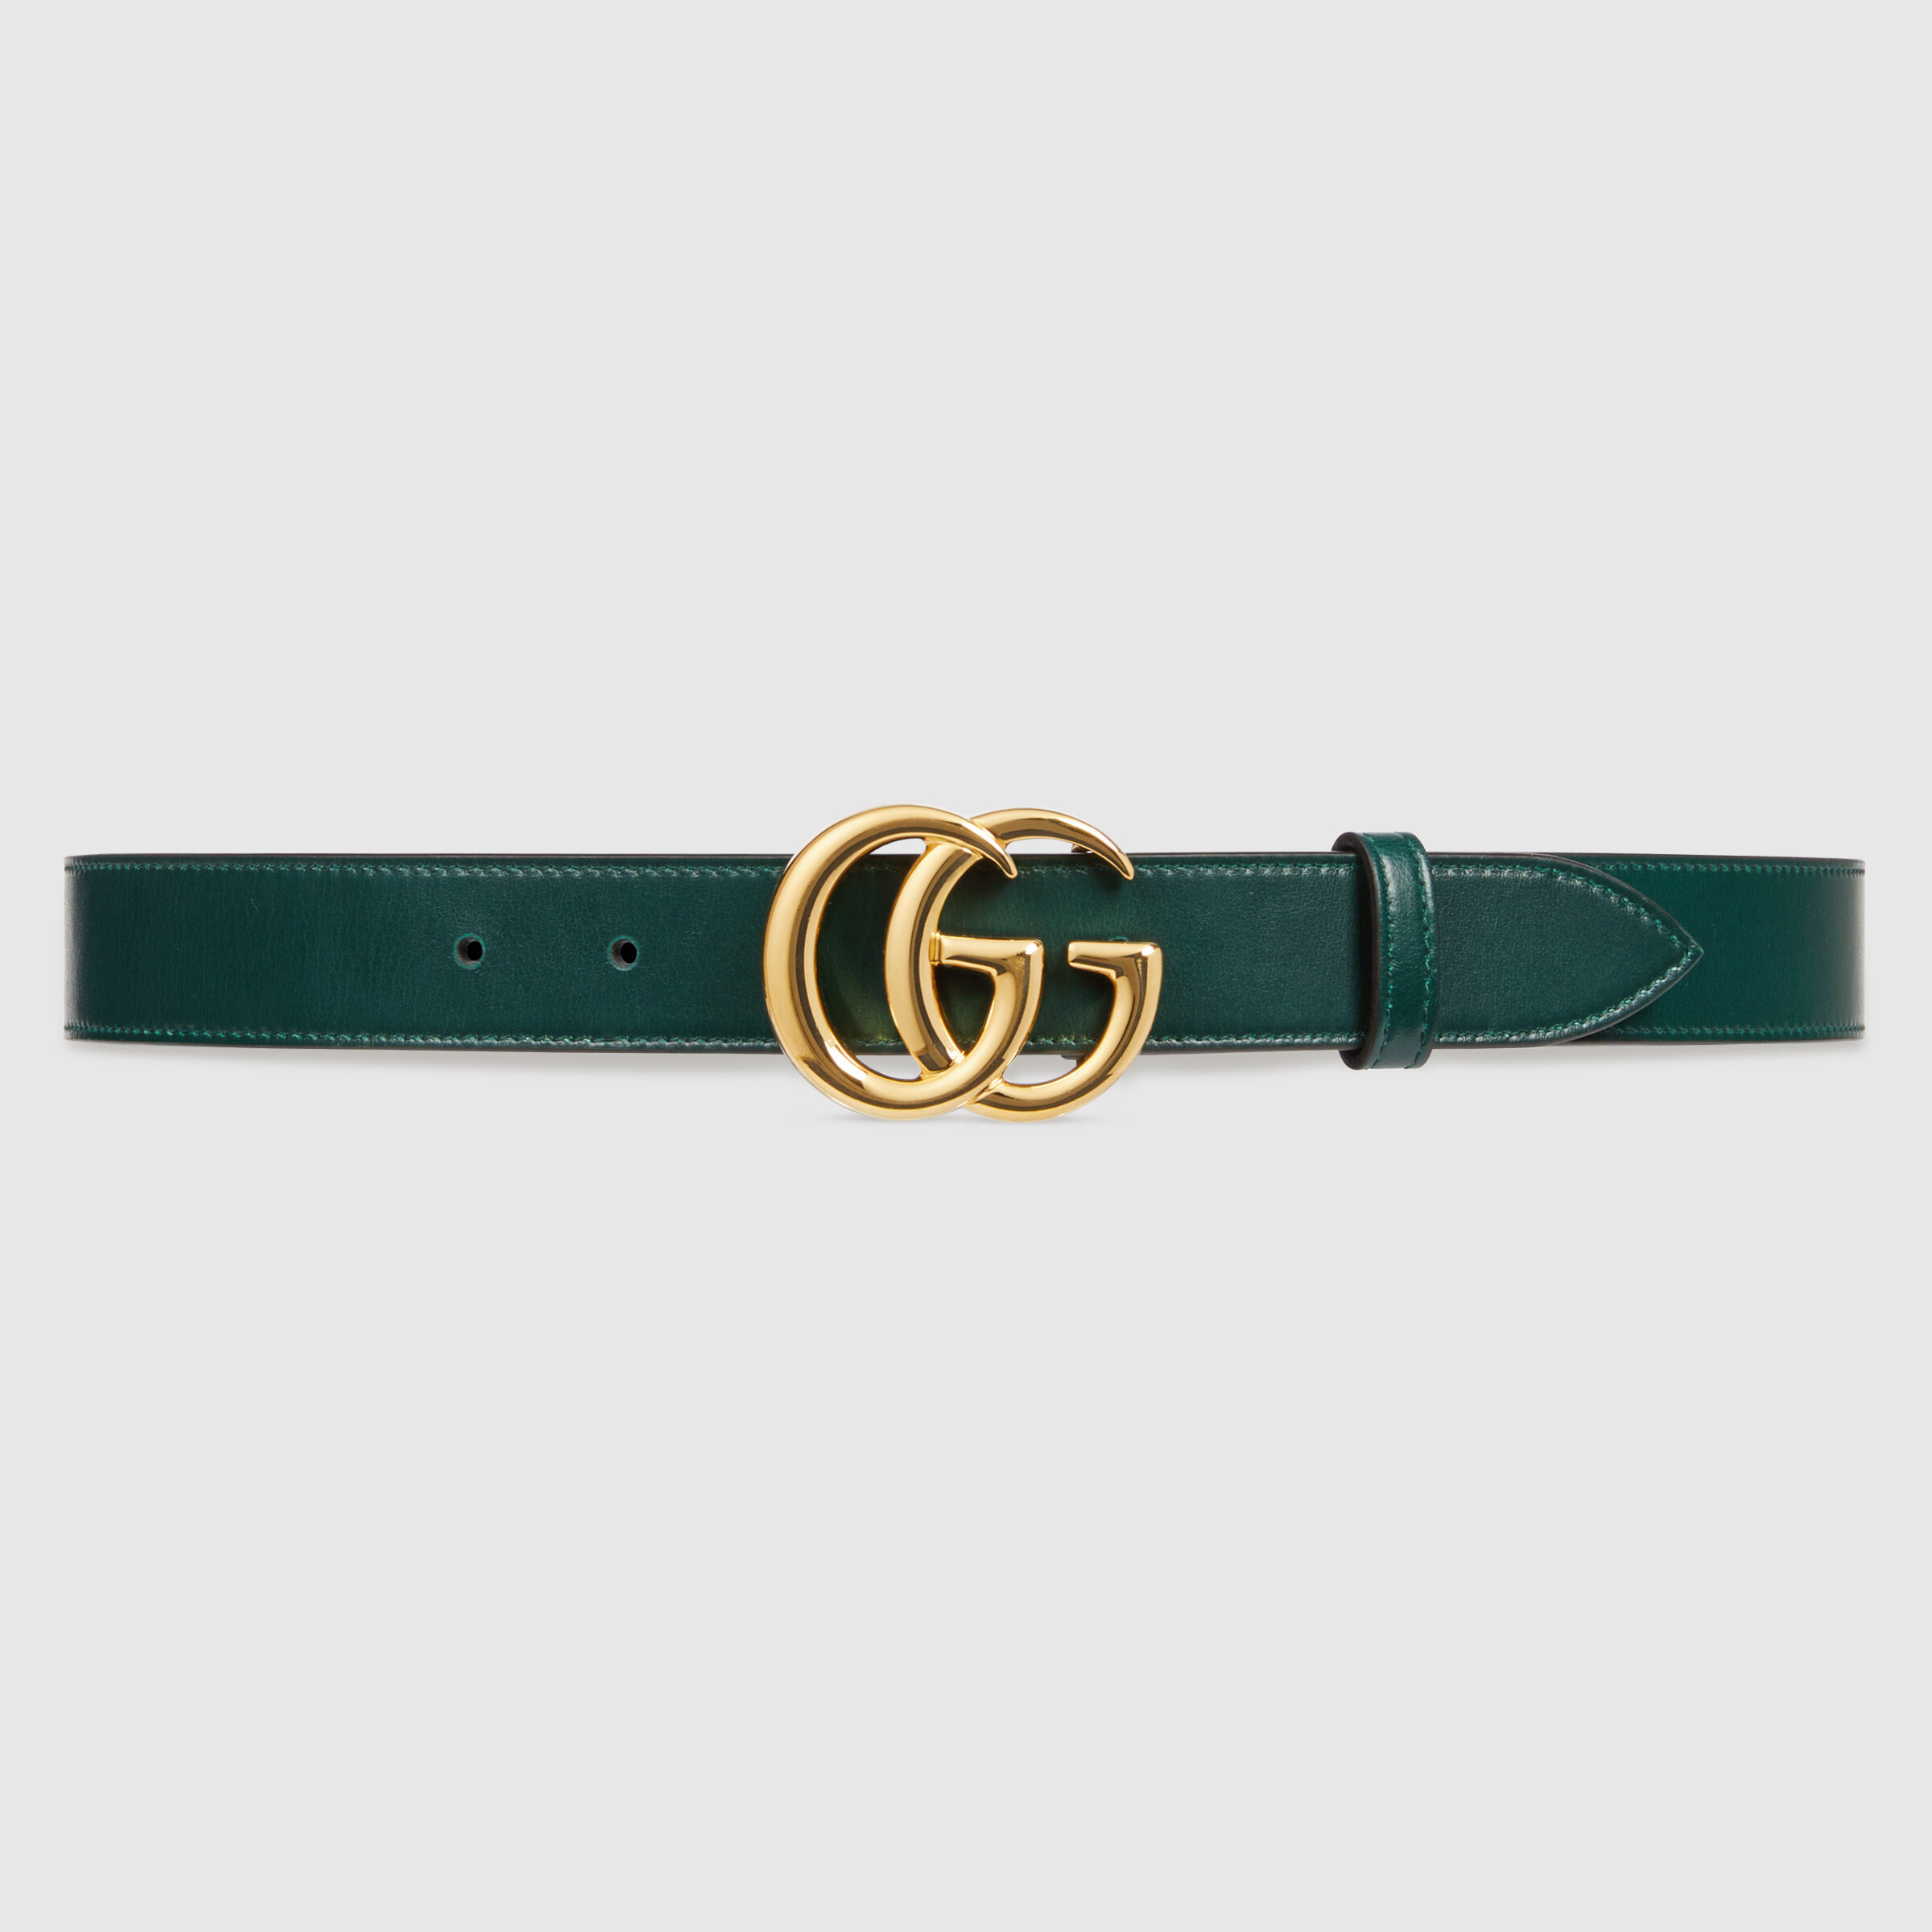 Gucci GG Marmont green leather belt with shiny buckle.jpg